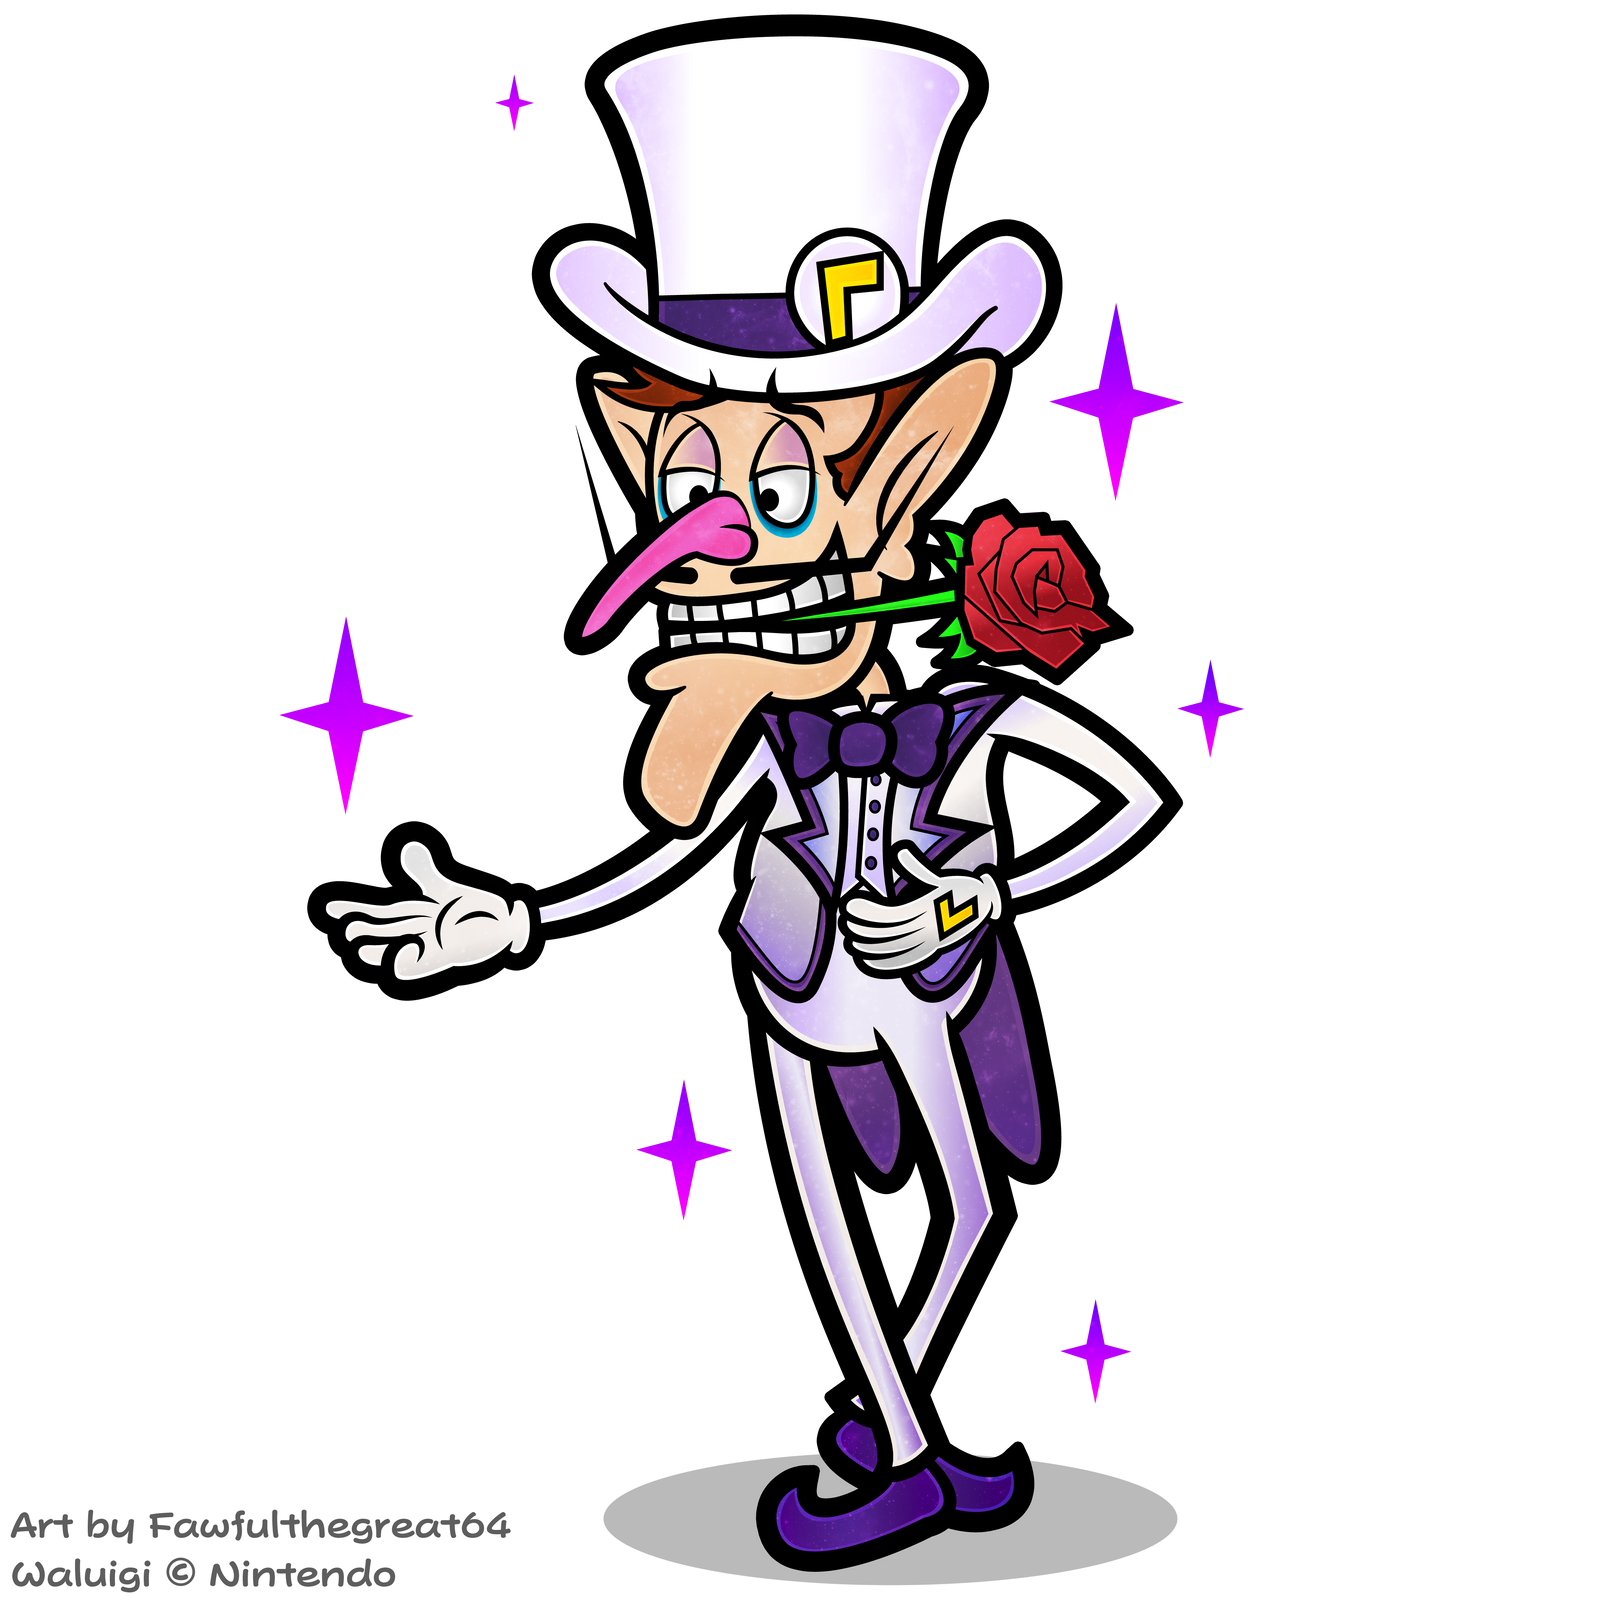 dapper_wah_by_fawfulthegreat64-dcq2d47.png